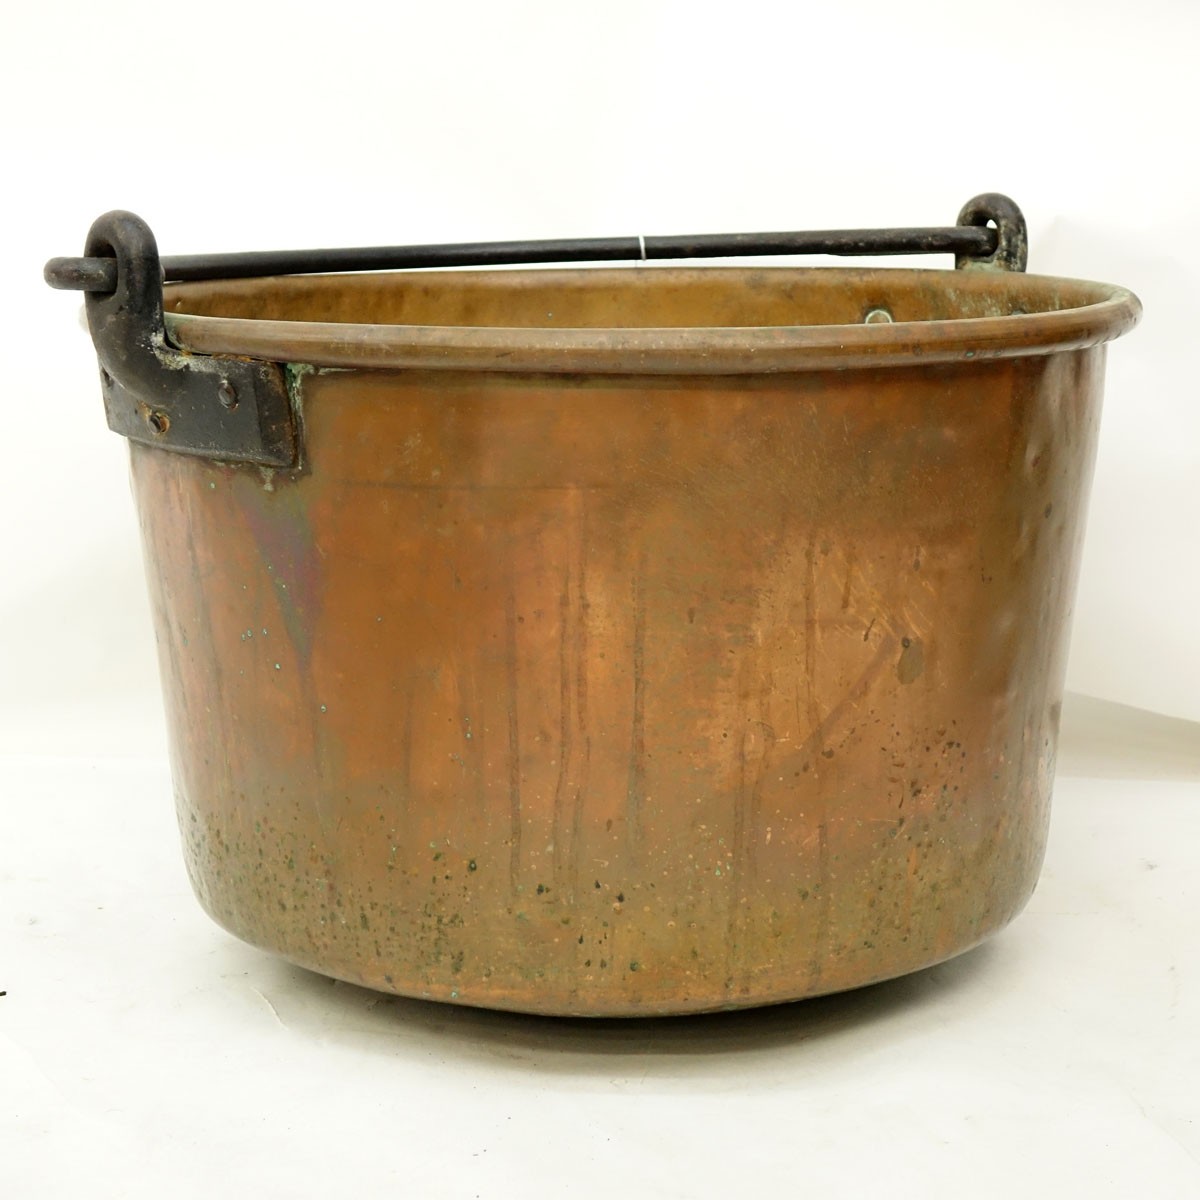 Large Antique Copper Pot. Rubbing to surface, dents, spotting and green patina.